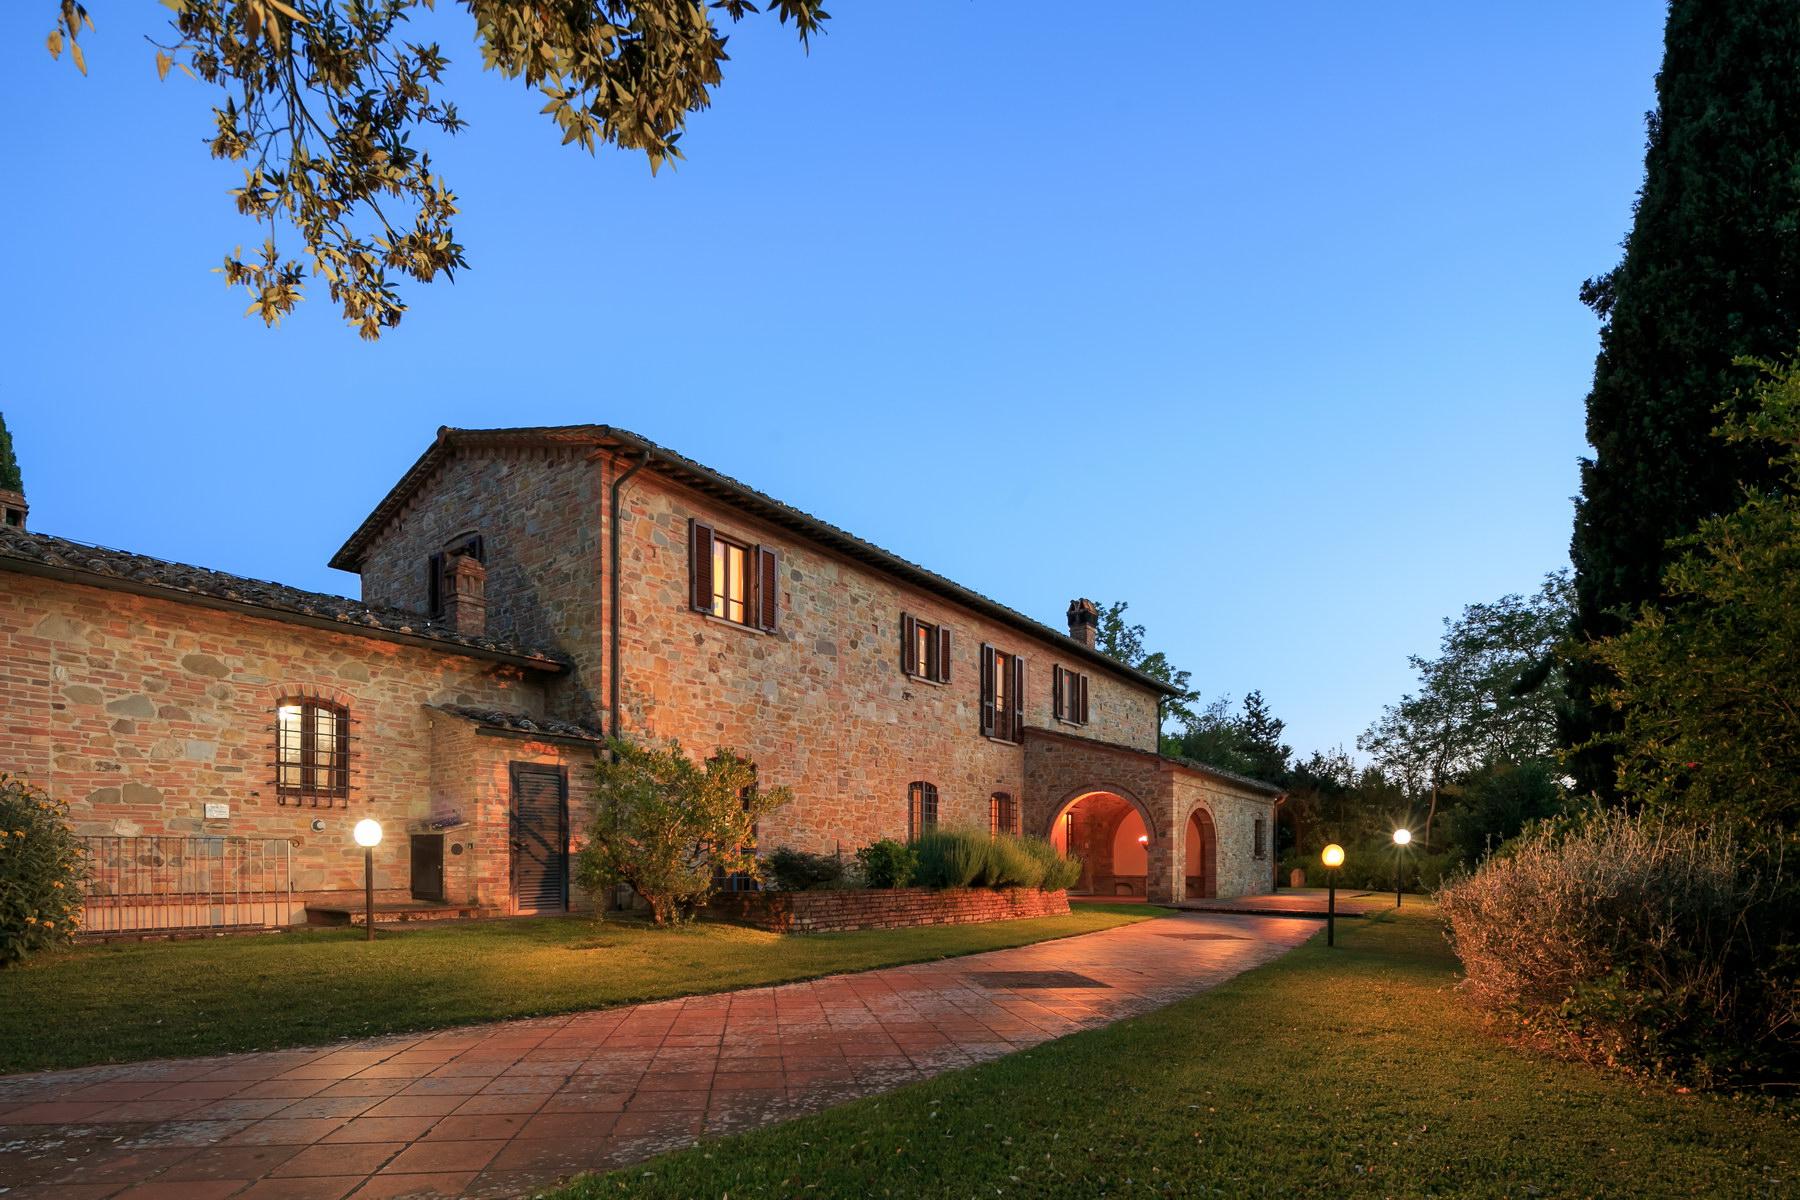 Wonderful countryhouse in the tuscan countryside - 13